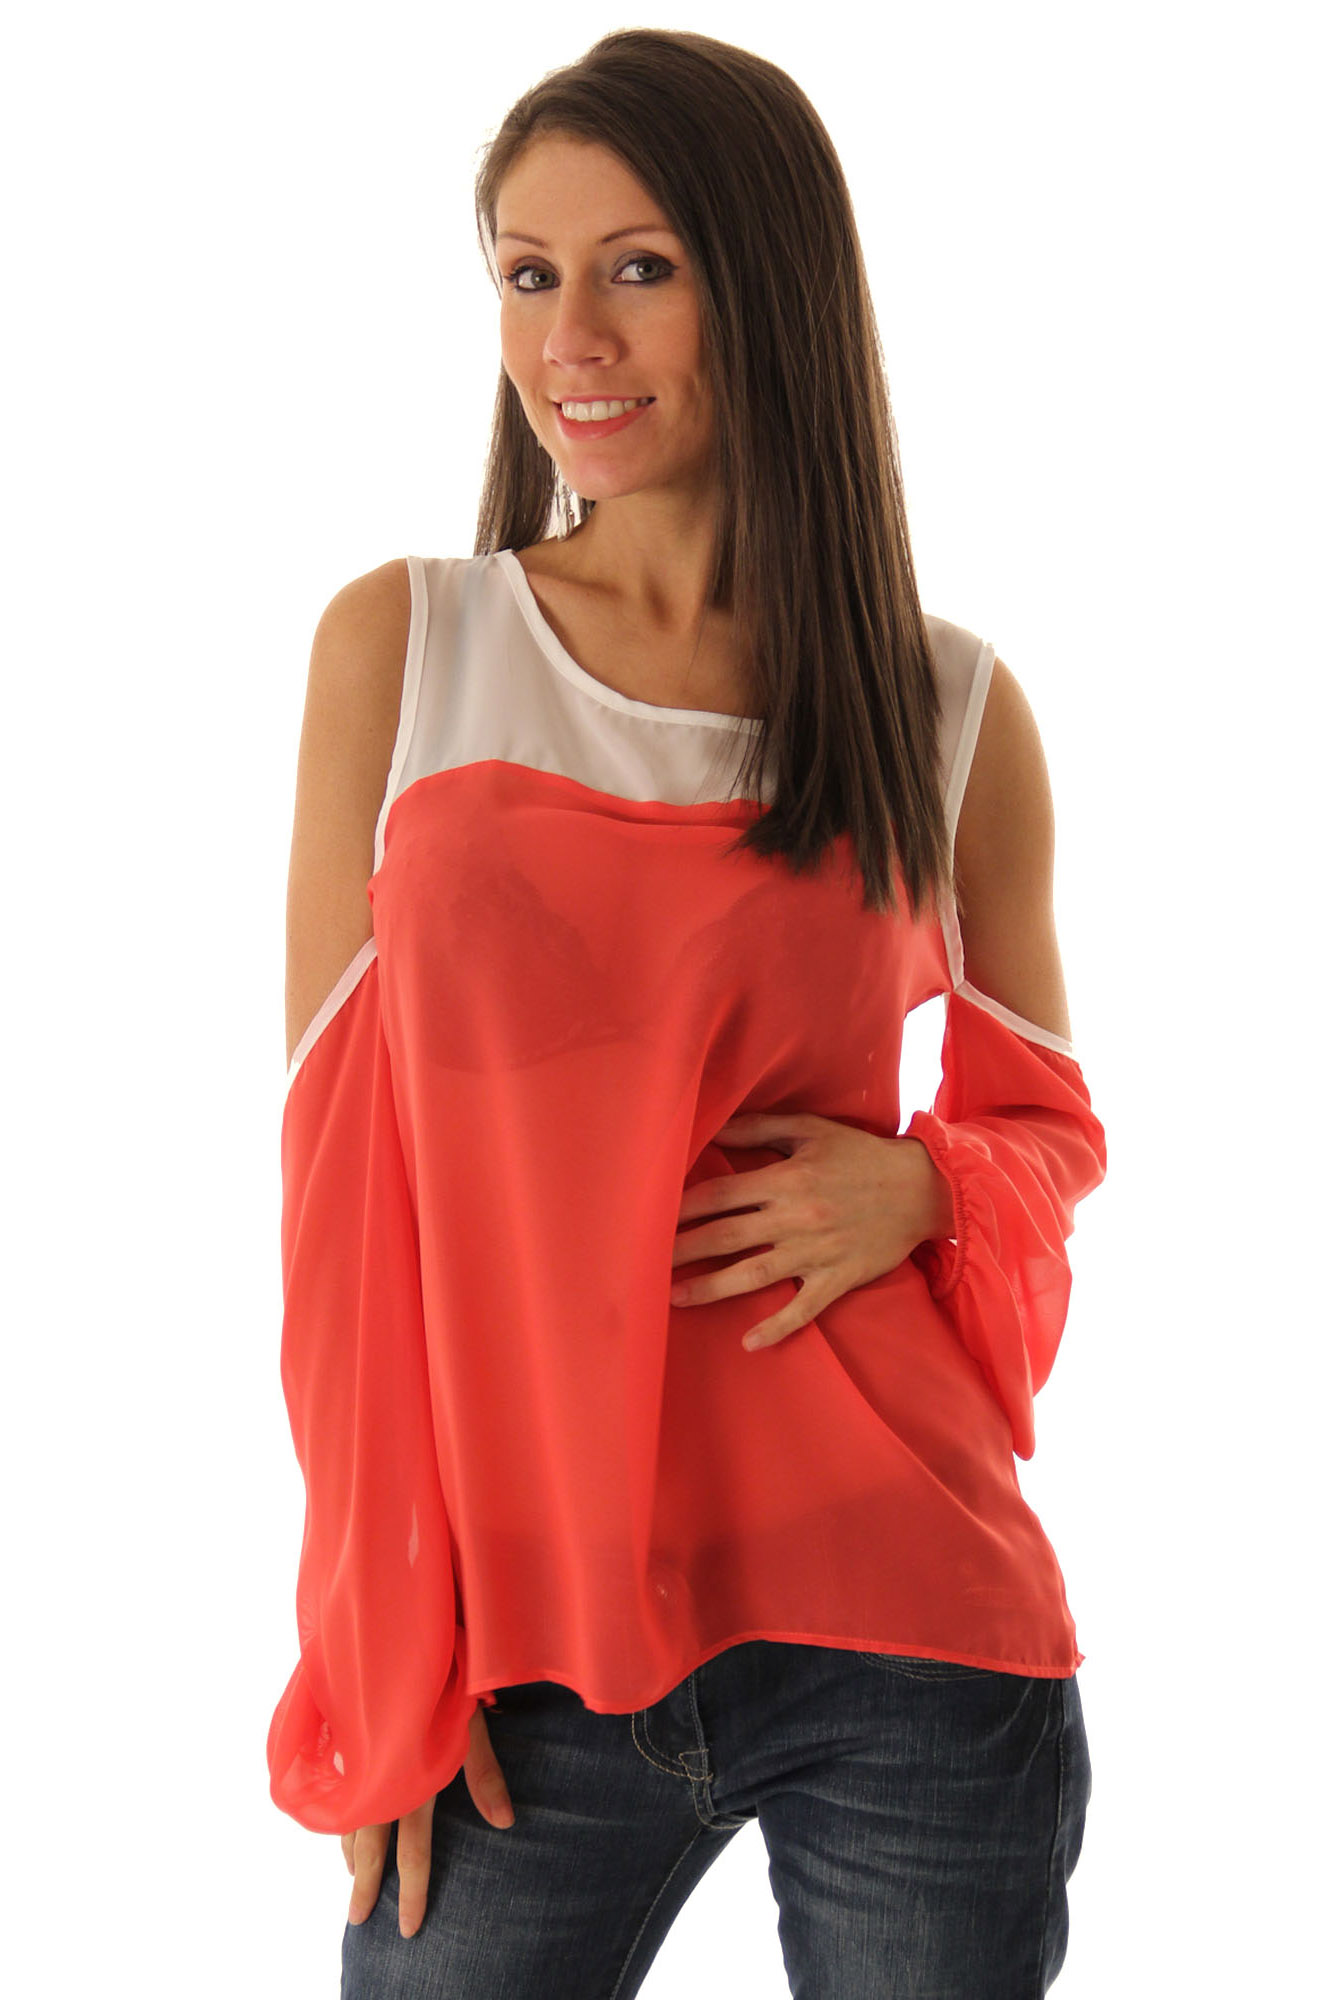 DHStyles.com DHStyles Women's Coral White Trendy Sheer Cold Shoulder Tunic Top - Small